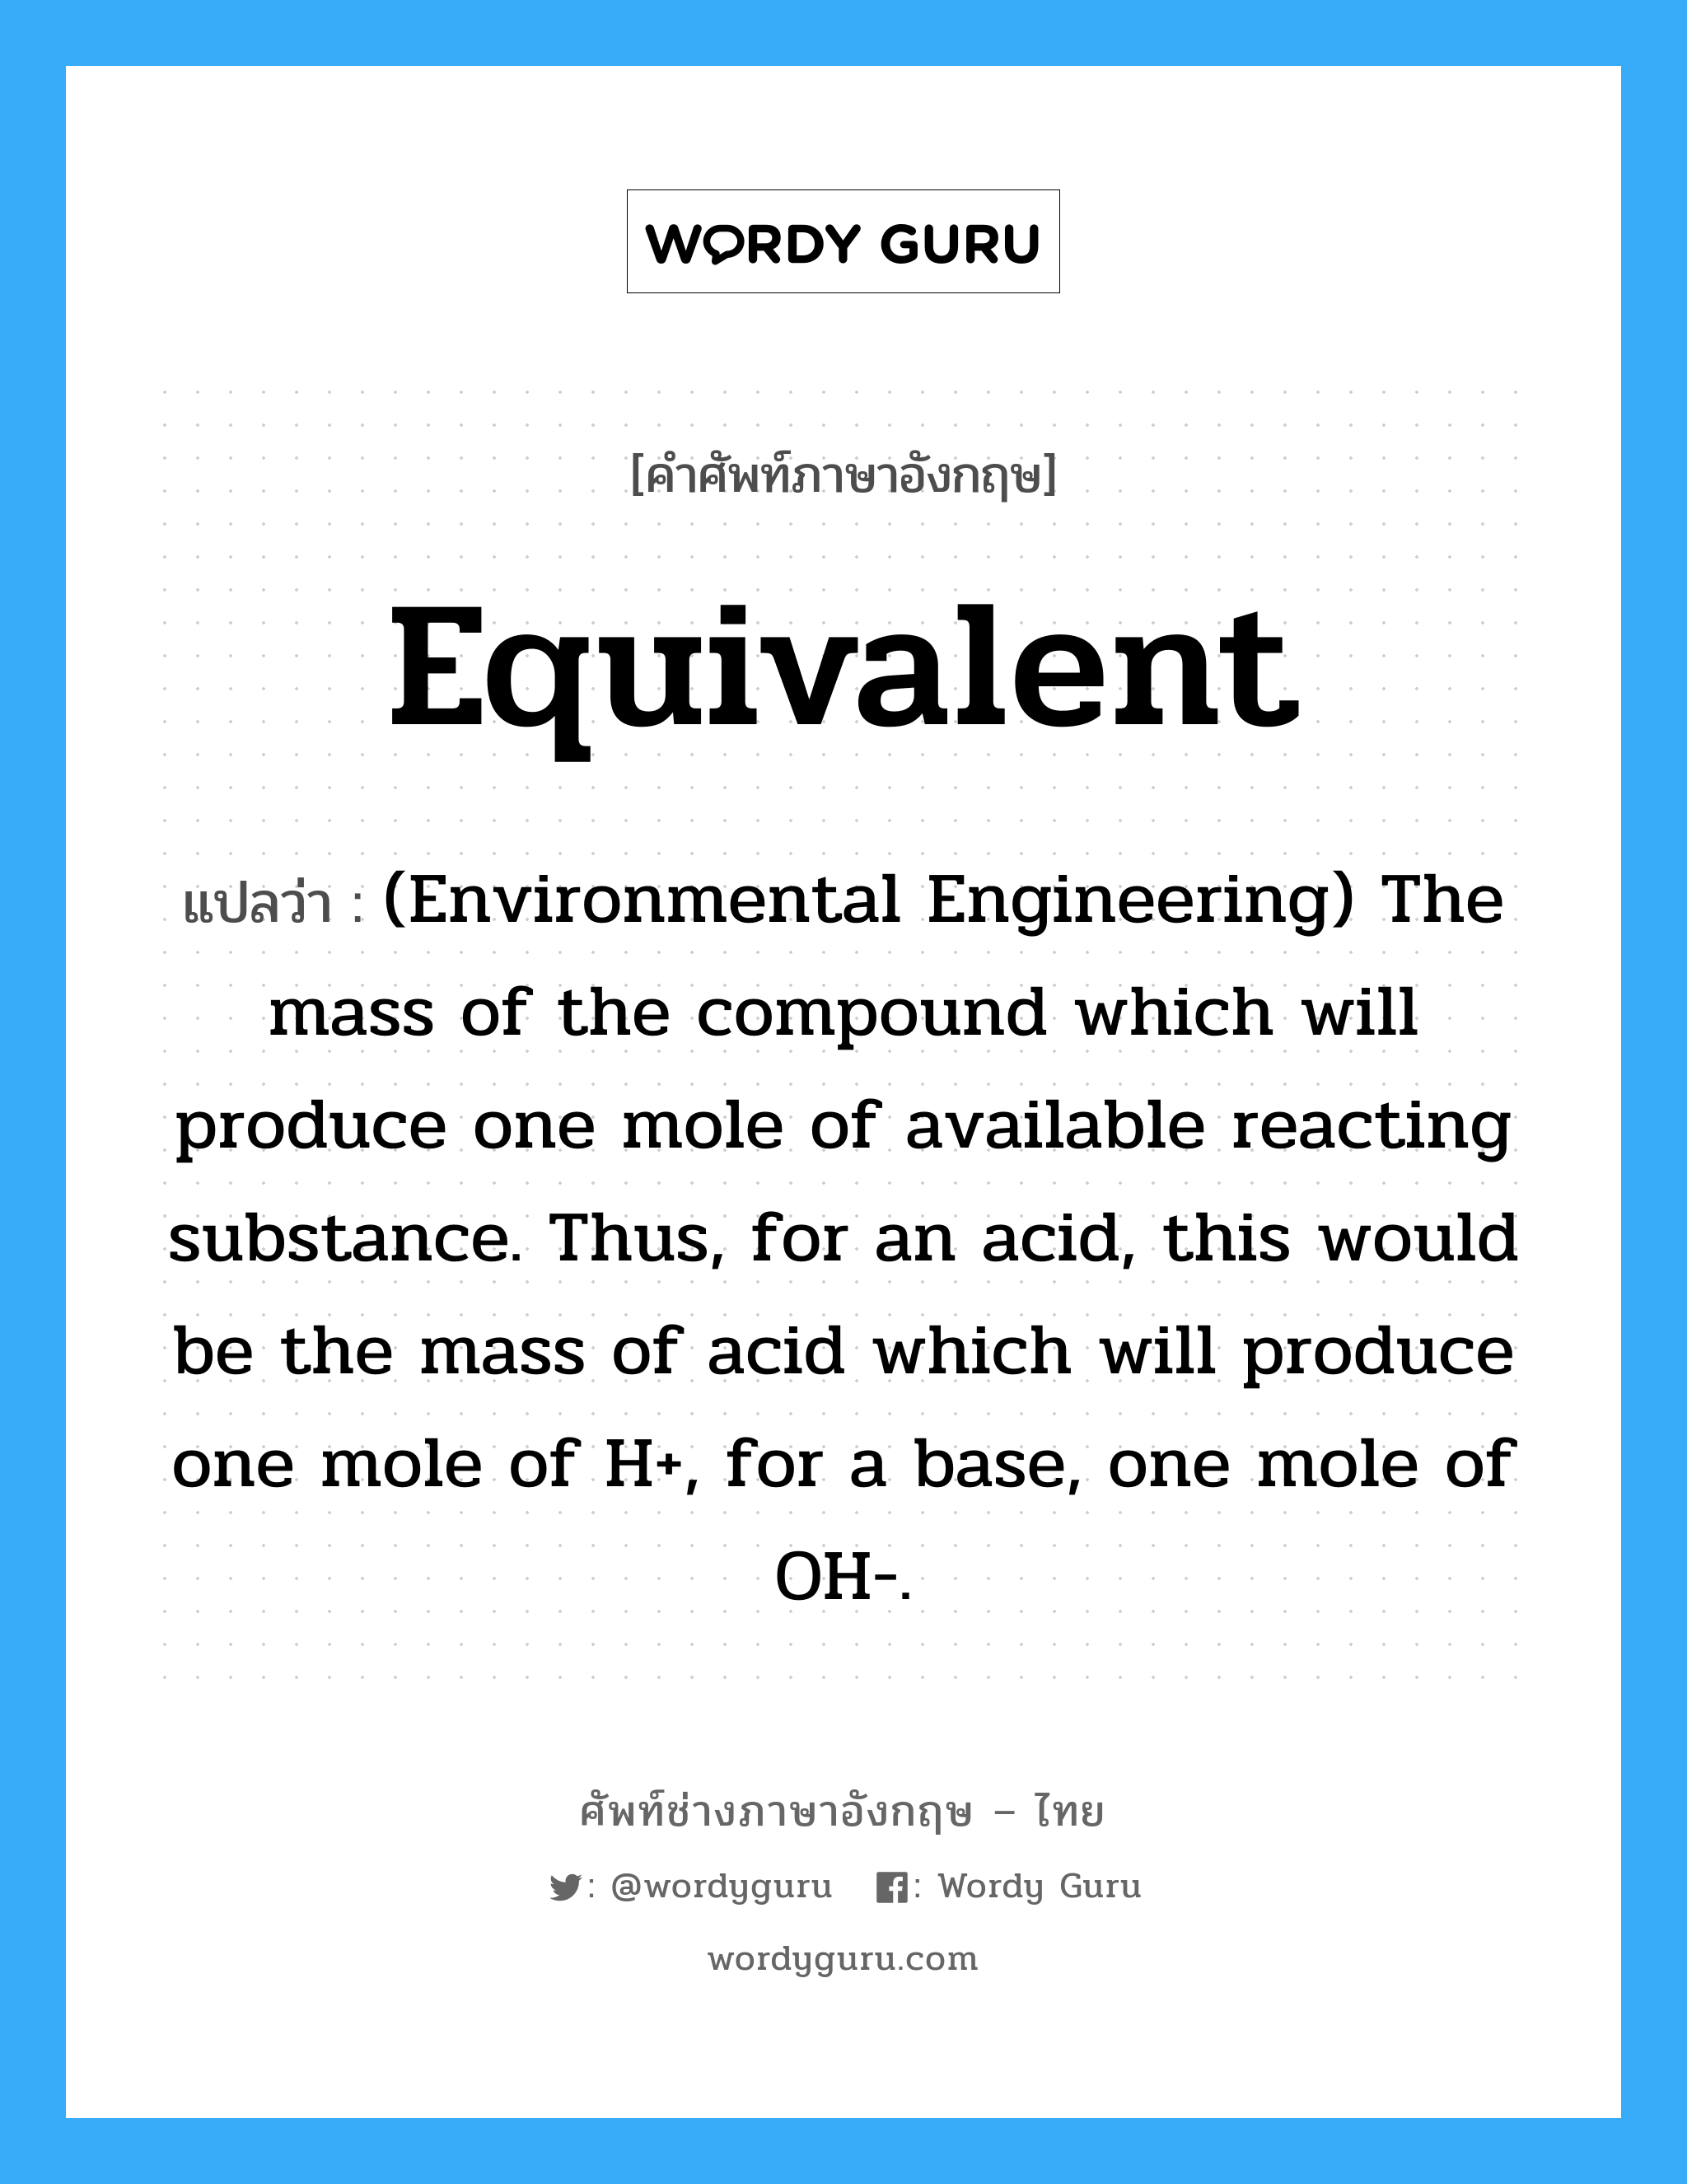 (Environmental Engineering) The mass of the compound which will produce one mole of available reacting substance. Thus, for an acid, this would be the mass of acid which will produce one mole of H+, for a base, one mole of OH-. ภาษาอังกฤษ?, คำศัพท์ช่างภาษาอังกฤษ - ไทย (Environmental Engineering) The mass of the compound which will produce one mole of available reacting substance. Thus, for an acid, this would be the mass of acid which will produce one mole of H+, for a base, one mole of OH-. คำศัพท์ภาษาอังกฤษ (Environmental Engineering) The mass of the compound which will produce one mole of available reacting substance. Thus, for an acid, this would be the mass of acid which will produce one mole of H+, for a base, one mole of OH-. แปลว่า Equivalent